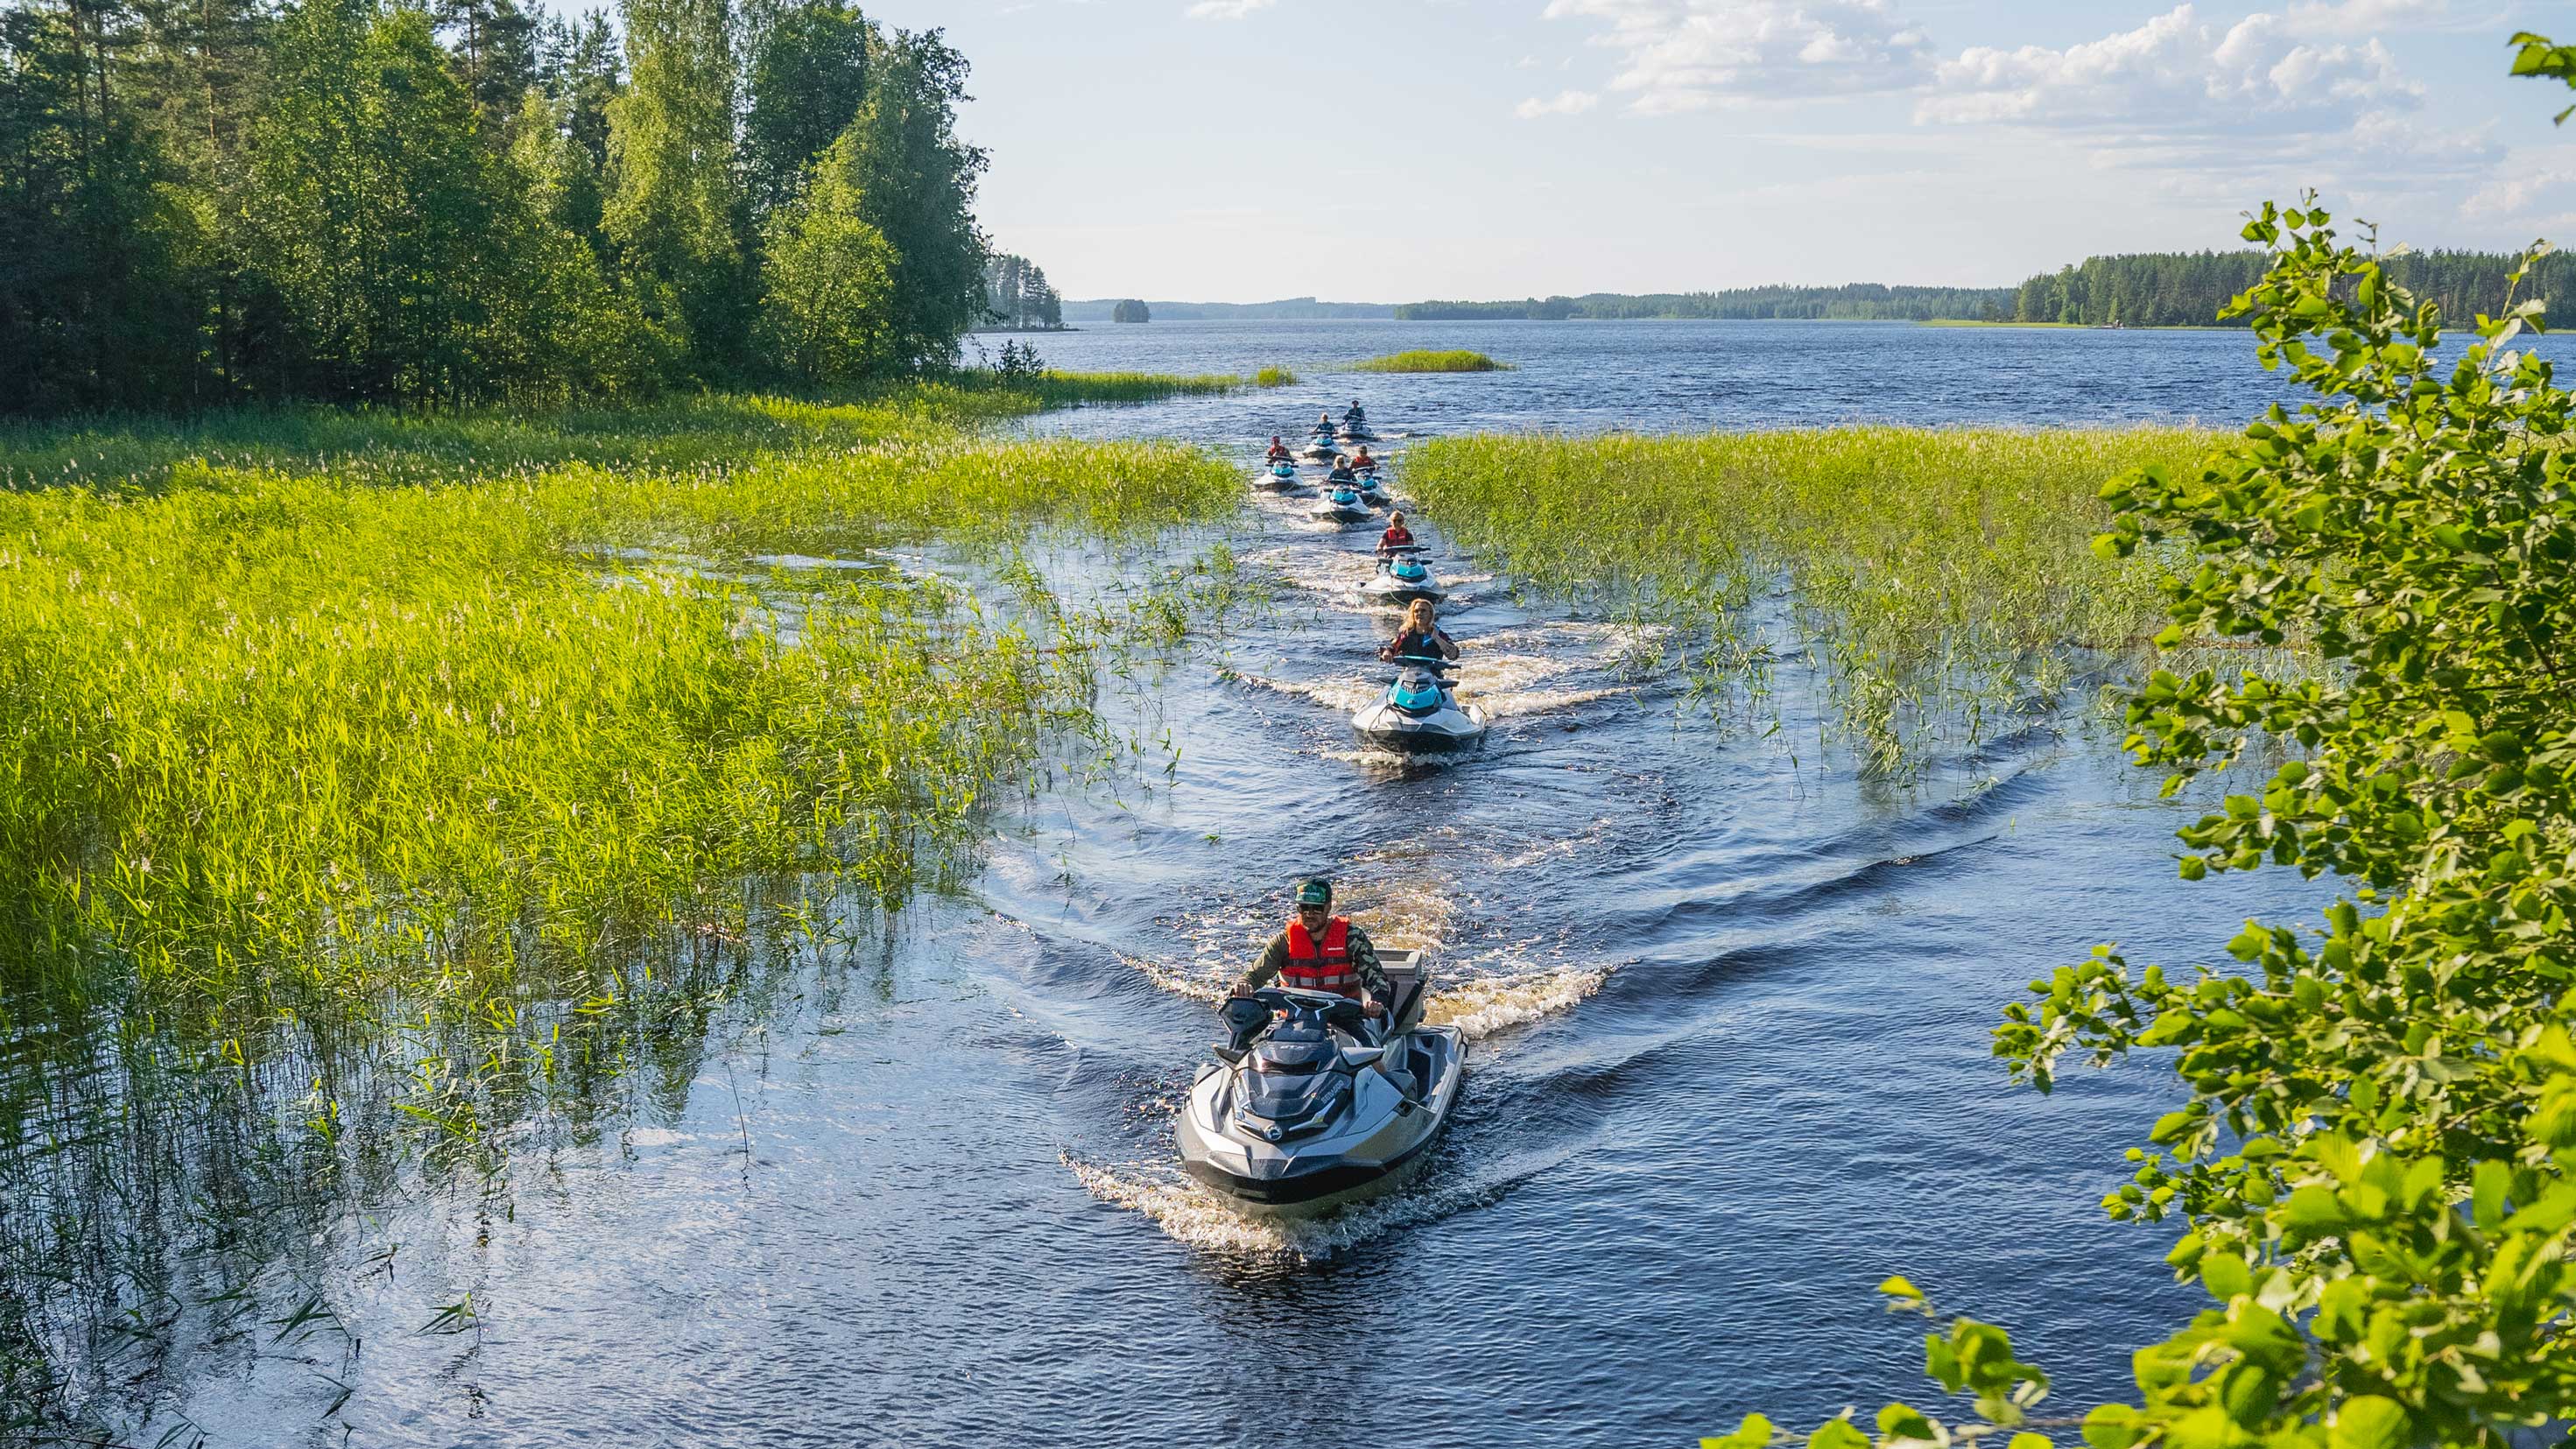 Group of people riding Sea-Doo in Finland